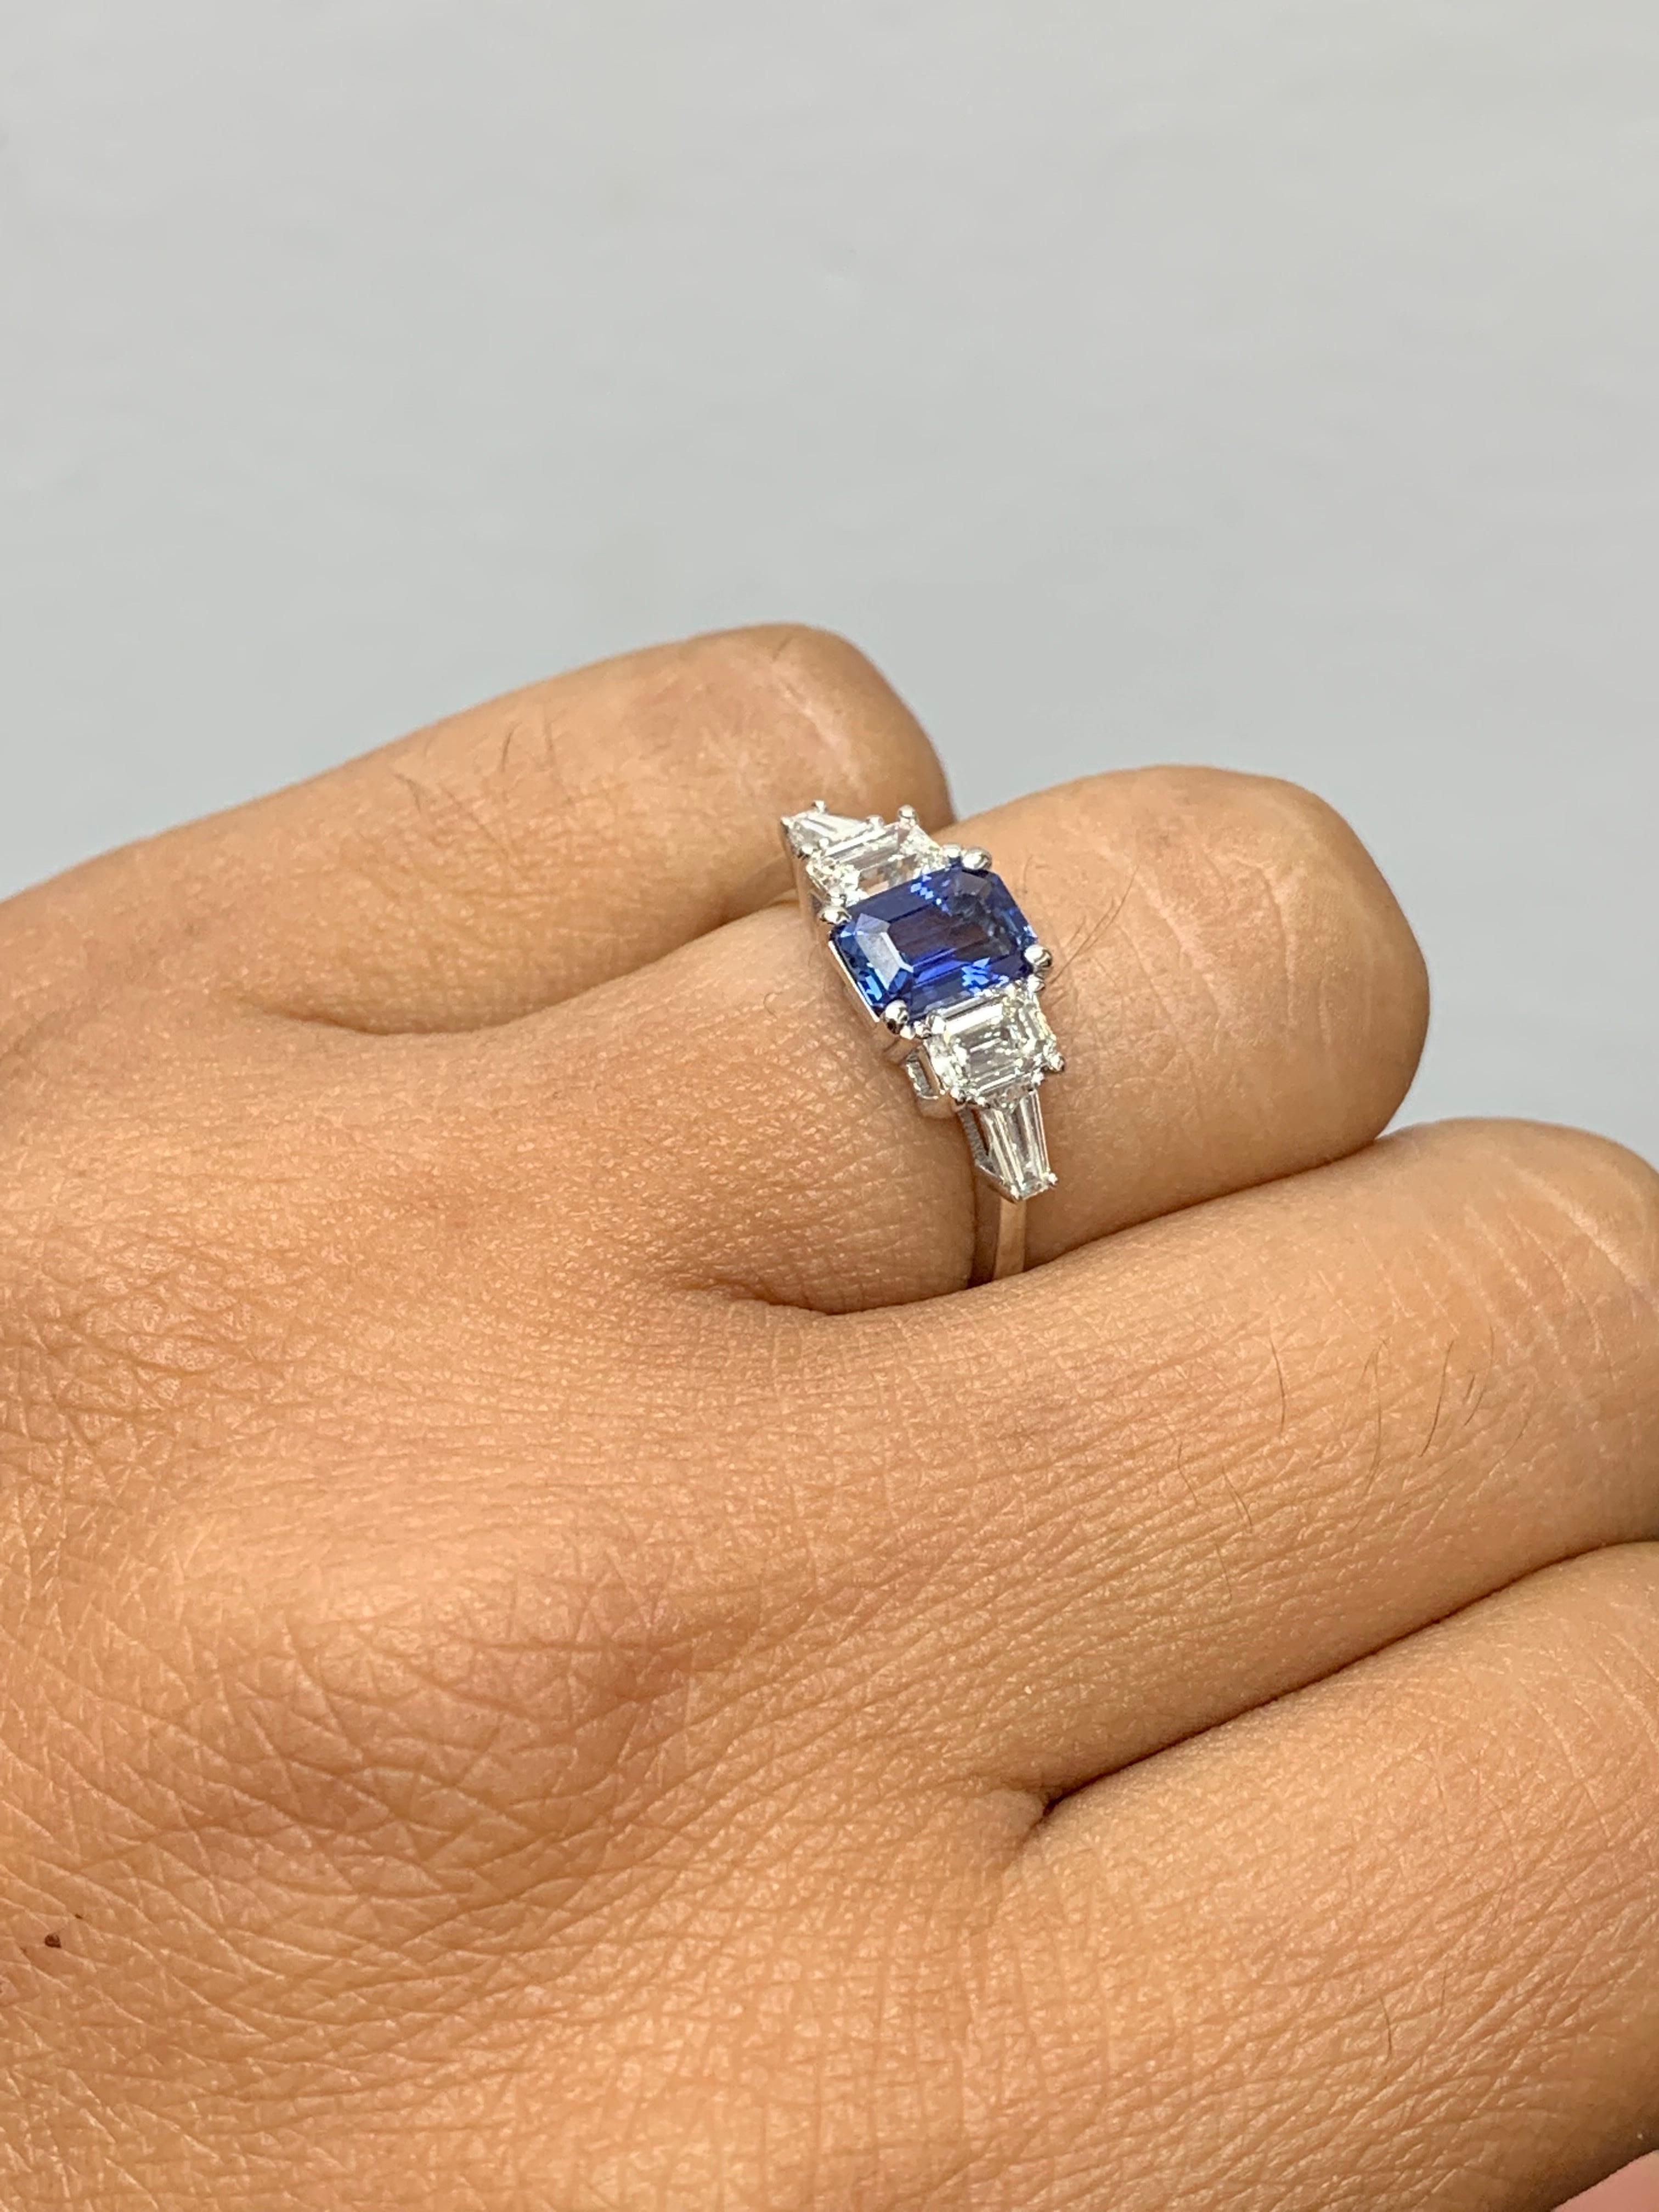 1.12 Carat Emerald Cut Blue Sapphire and Diamond 5 Stone Ring in 14K White Gold For Sale 6